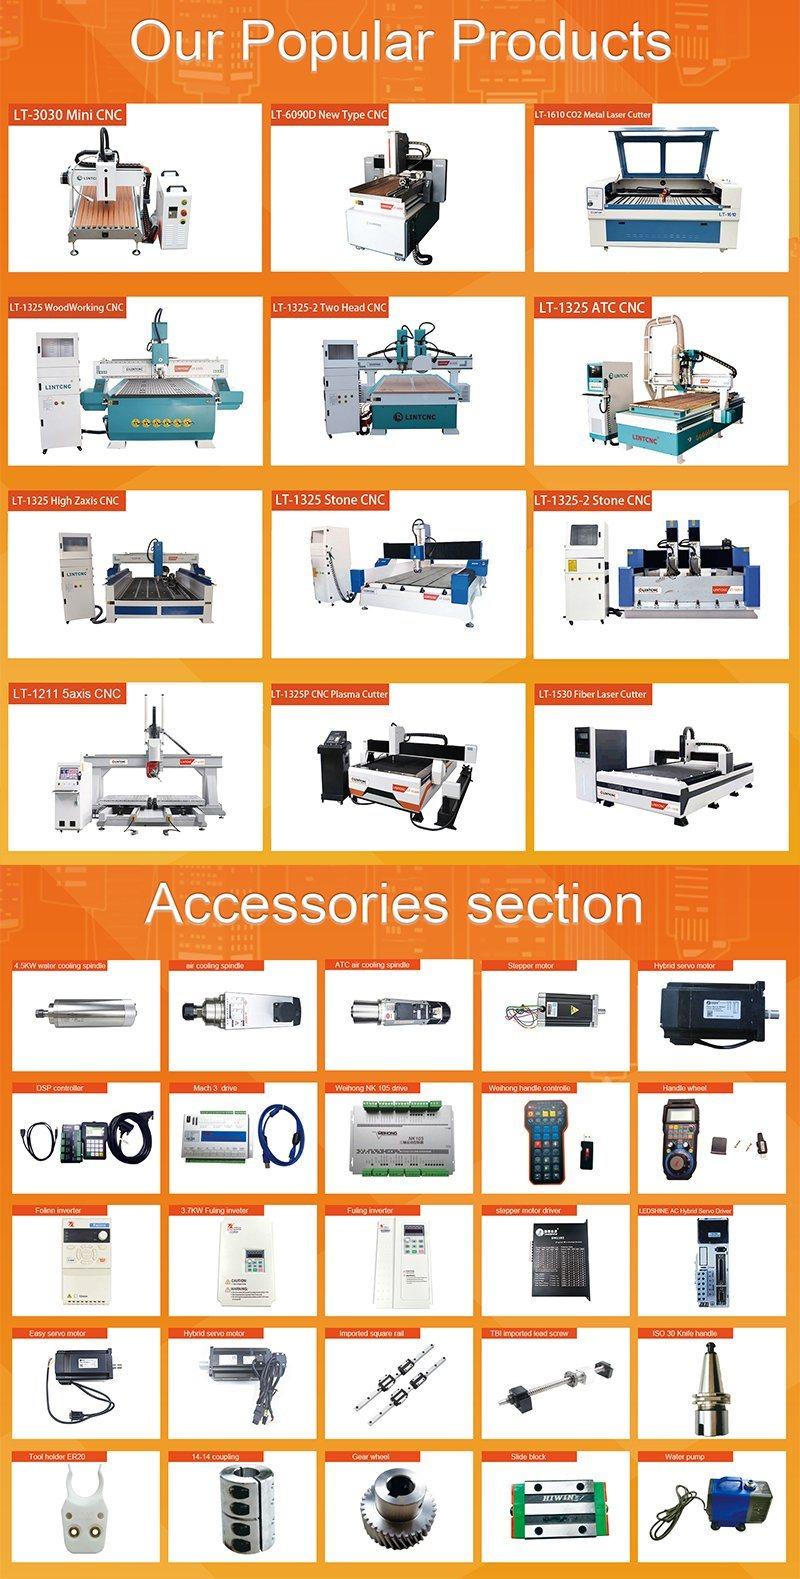 9015 9012 1212 6090 Atc CNC Router with 6 Tools Automatic Change Tools Highly Automatic Nesting Solution with Automatic Loading and Unloading System